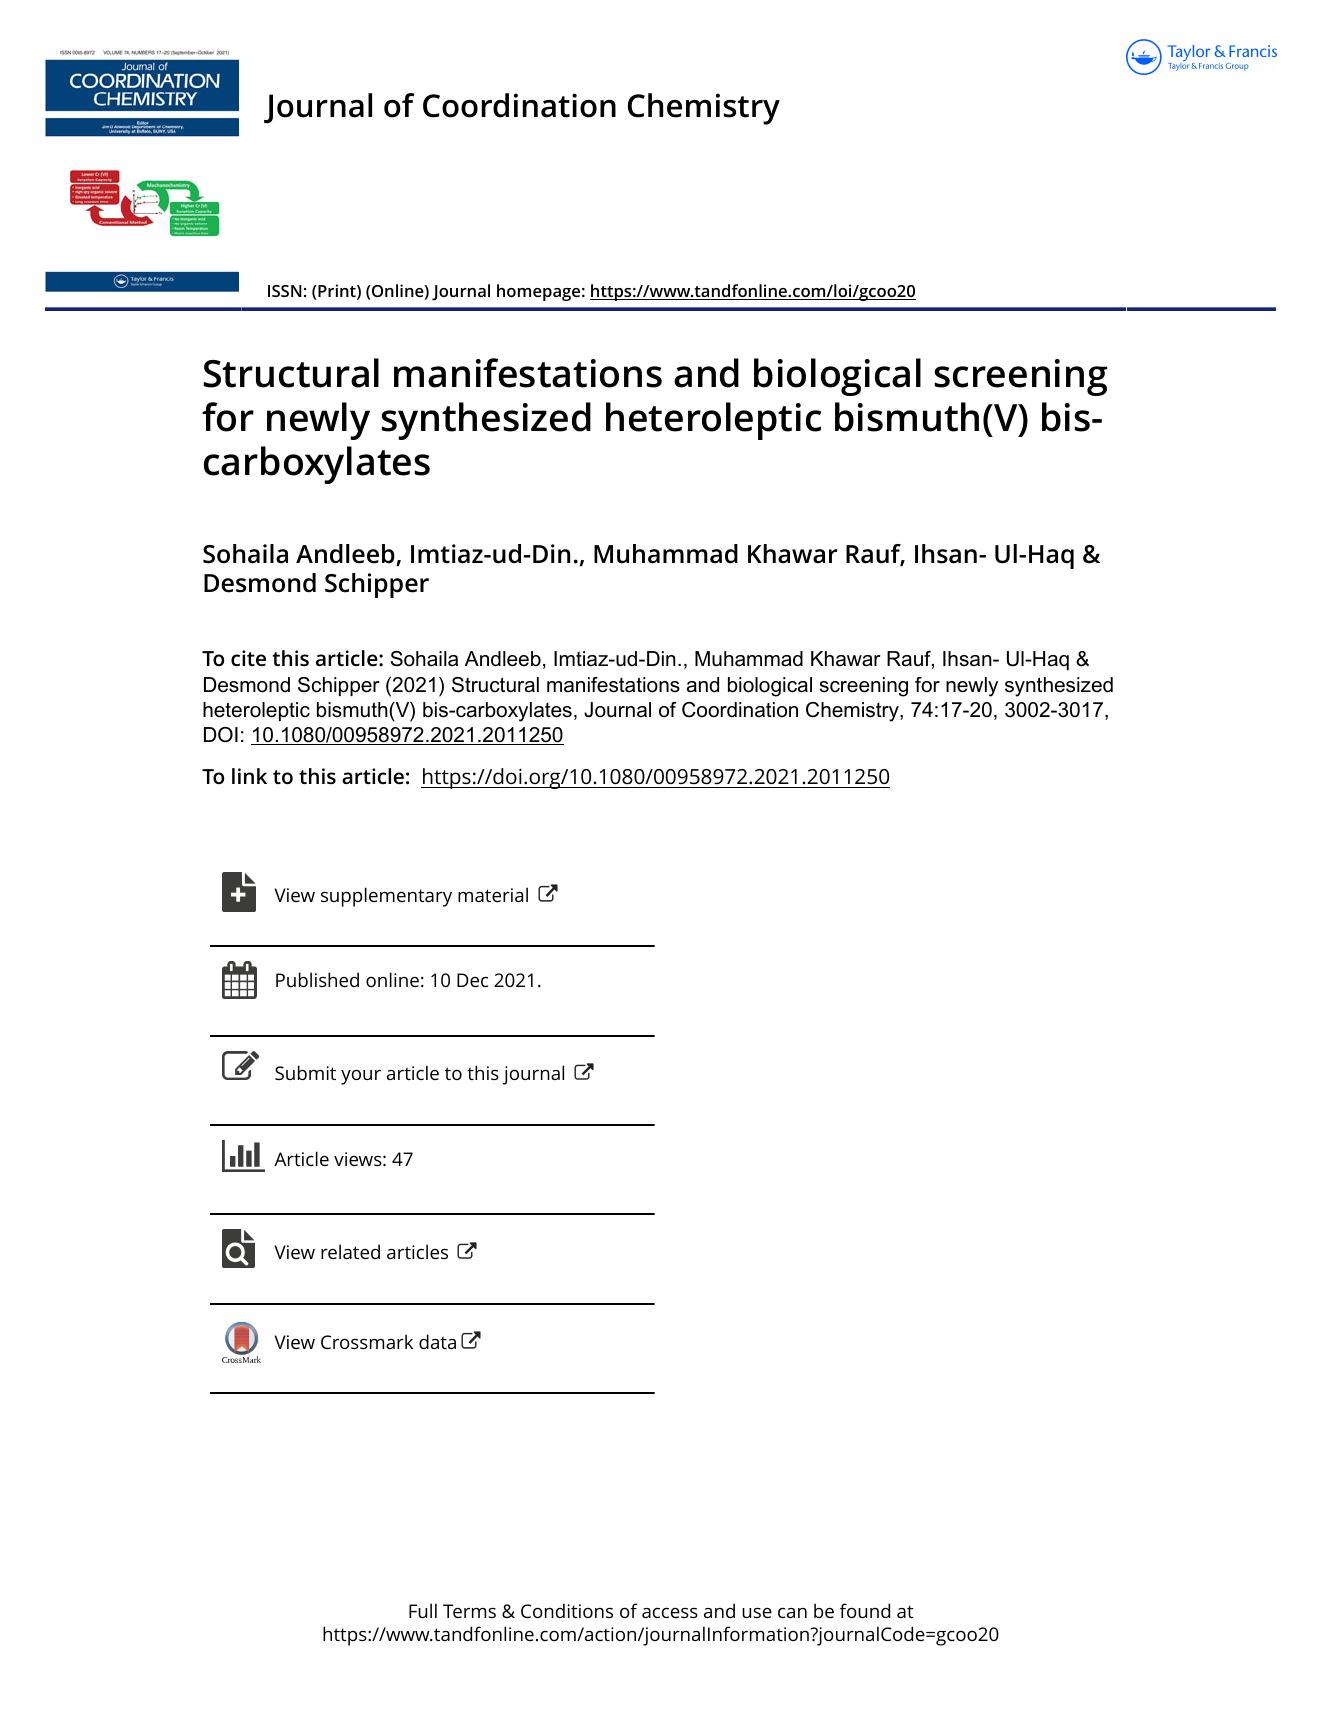 Structural manifestations and biological screening for newly synthesized heteroleptic bismuth(V) bis-carboxylates by Andleeb Sohaila & Rauf Muhammad Khawar & Ul-Haq Ihsan- & Schipper Desmond